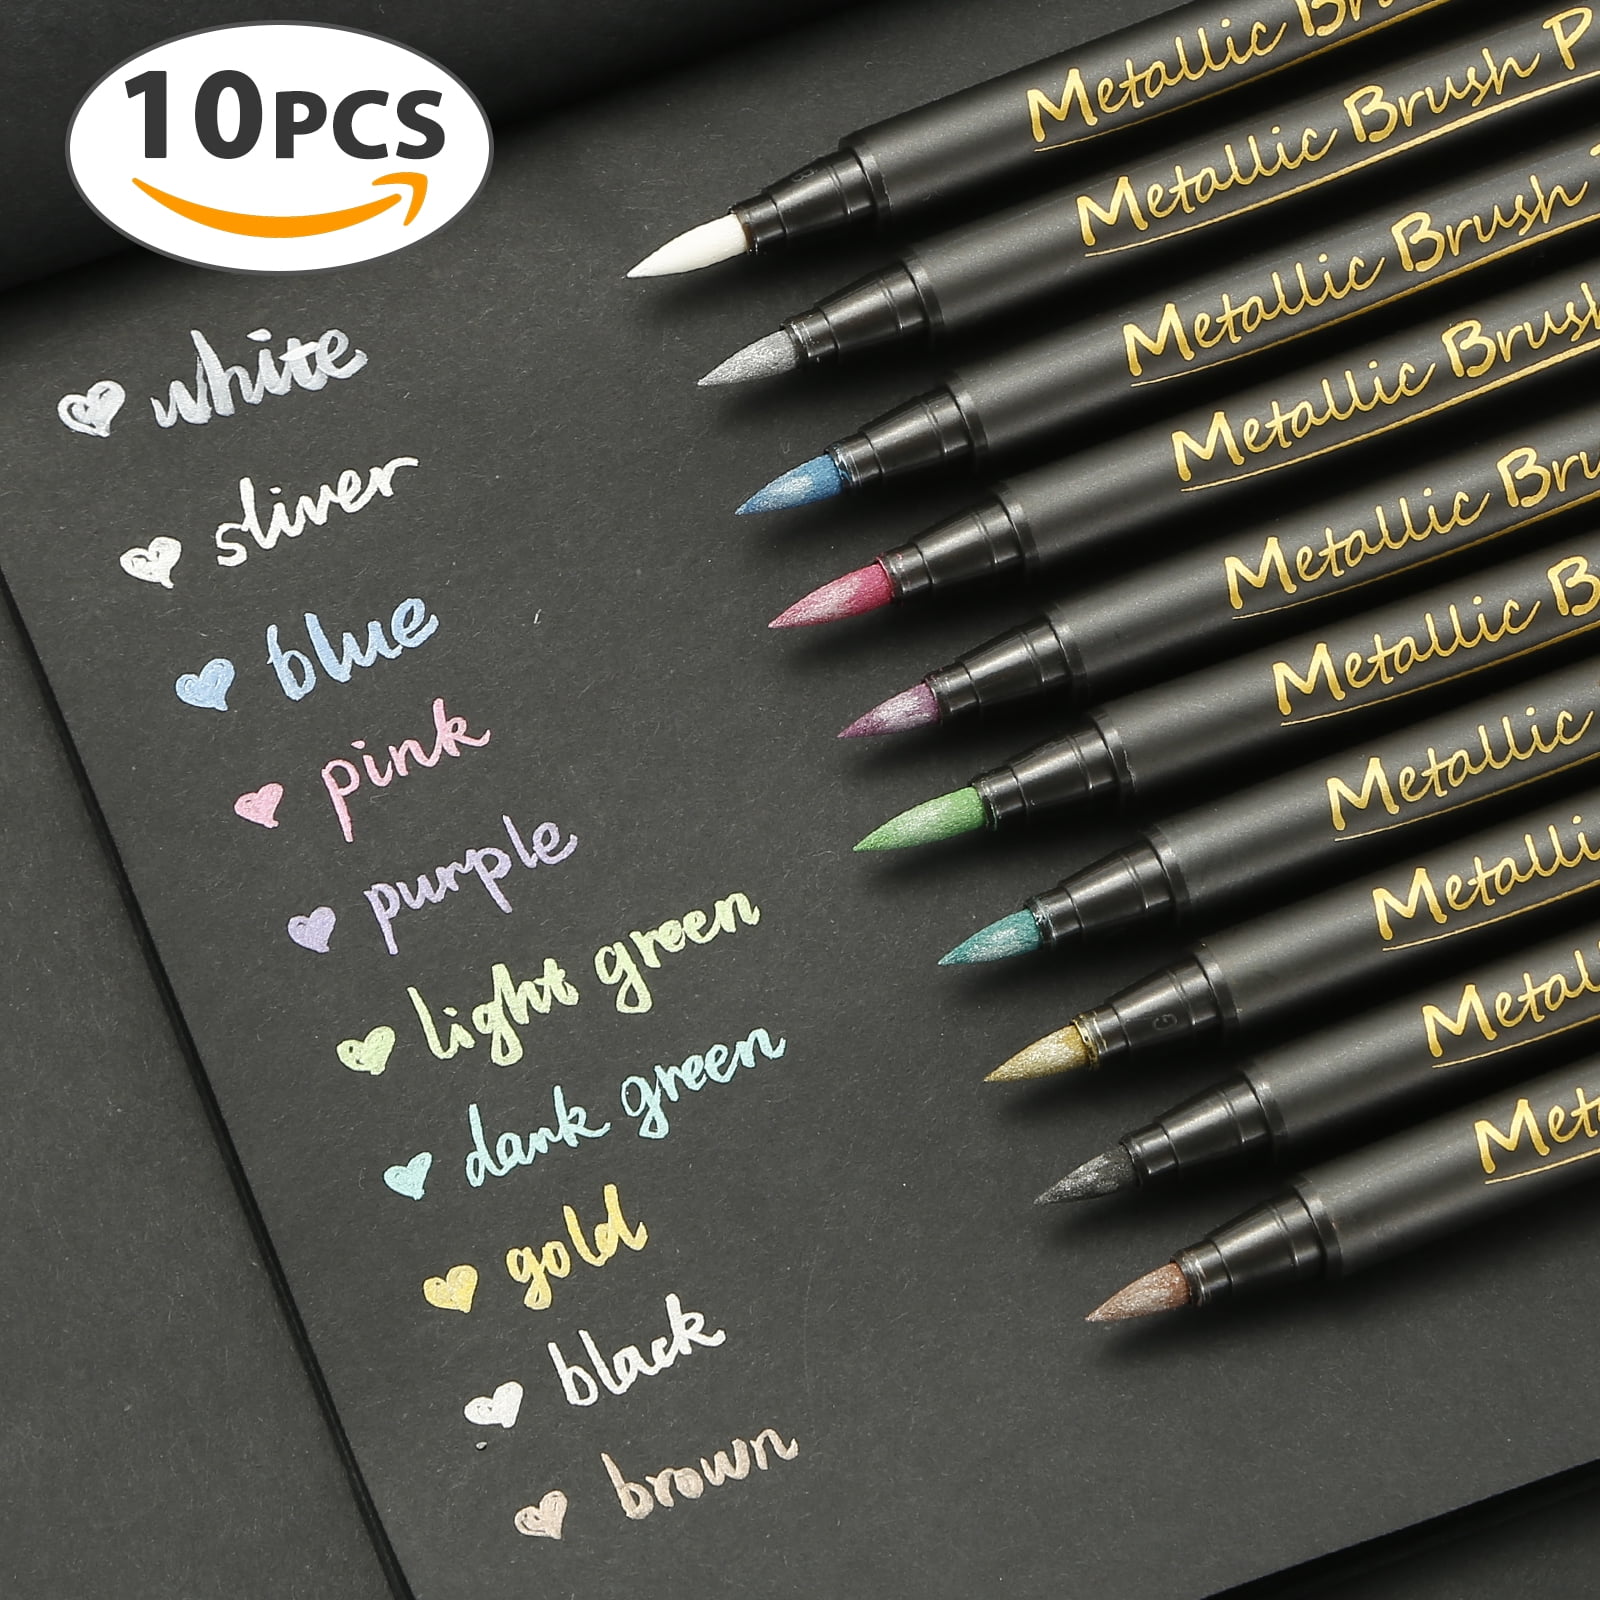 20 Assorted Color Metallic Marker Pens,Glitter Painting Pen for Card Making,Birthday Greeting DIY Photo Album,Scrap Booking,Rock Painting,Mug,Calligraphy,Valentines Day Cards 